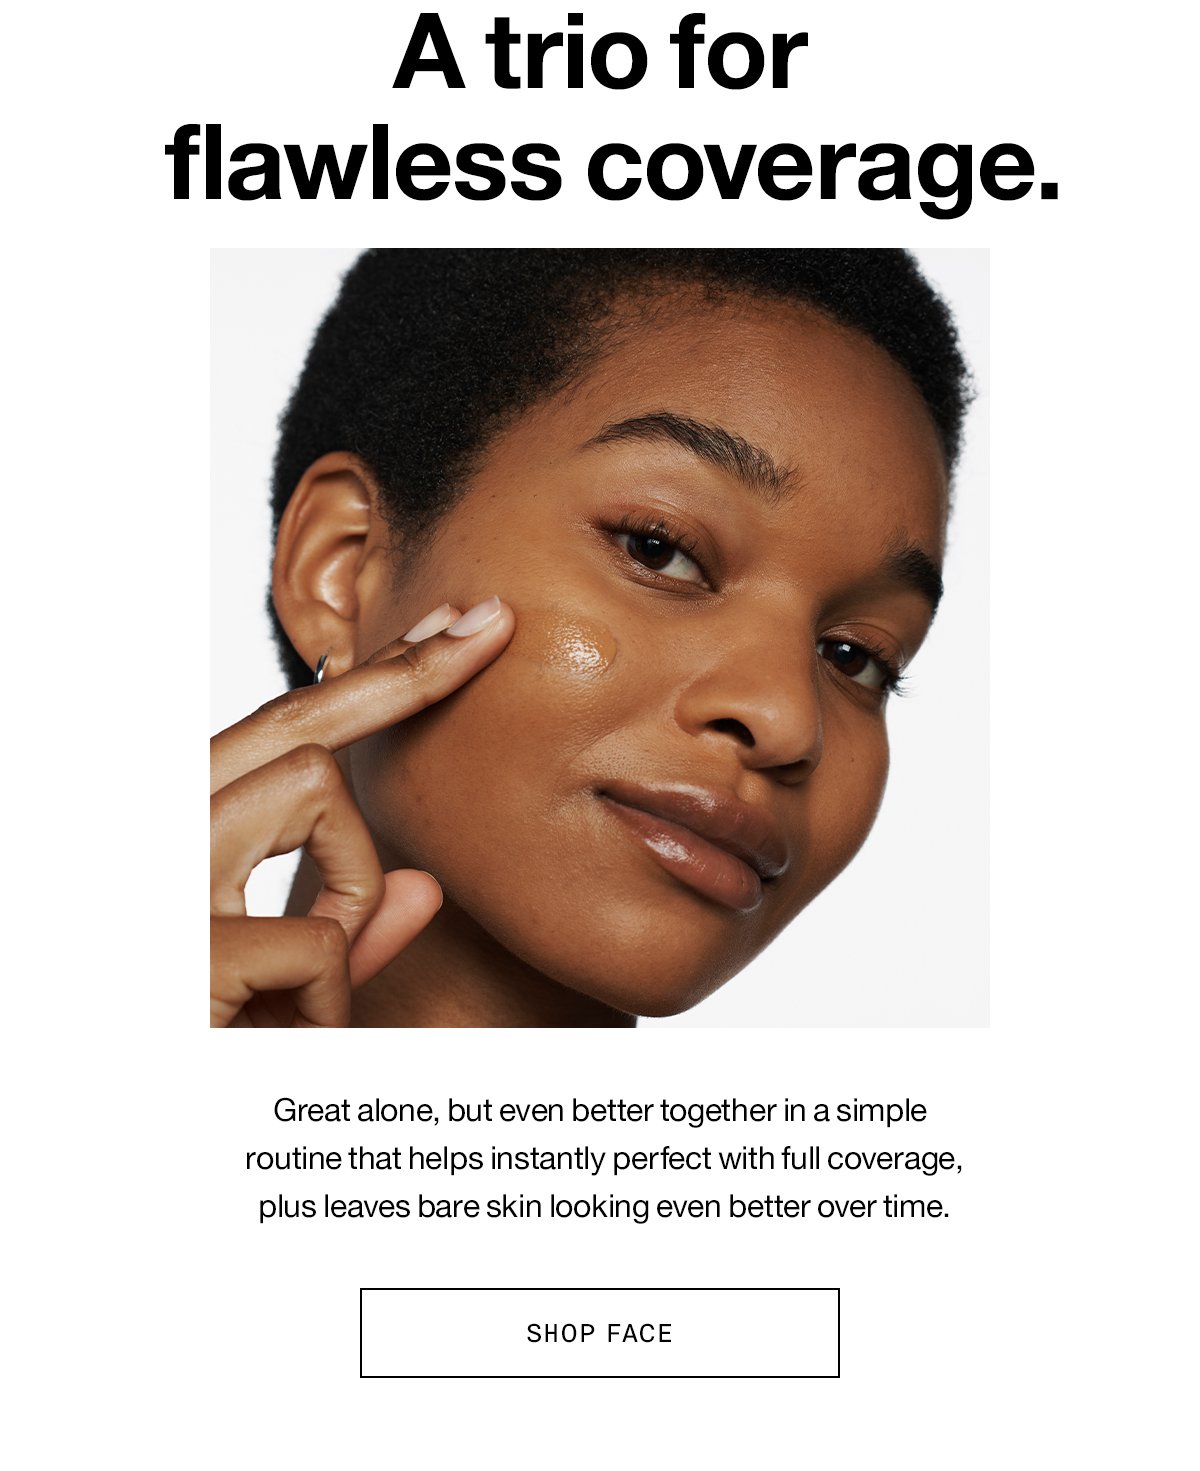 A trio for flawless coverage. Great alone, but even better together in a simple routine that helps instantly perfect with full coverage, plus leaves bare skin looking even better over time. SHOP FACE